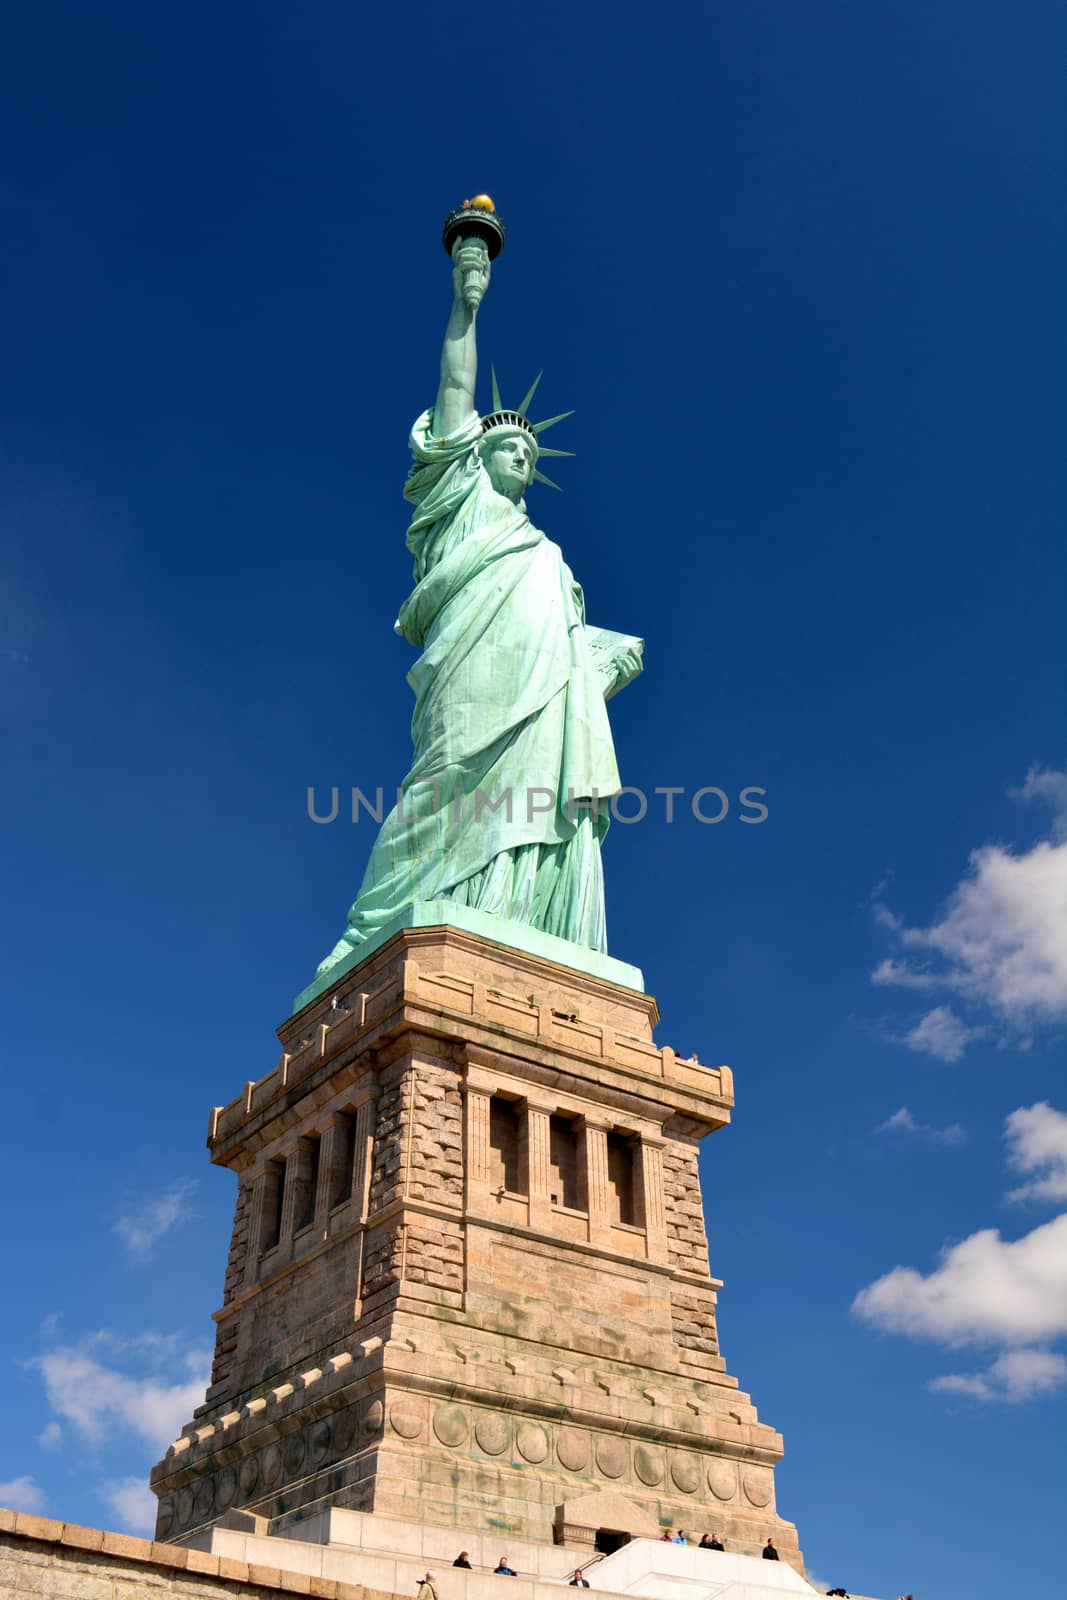 Statue of Liberty - New York City  - 49 by RefocusPhoto